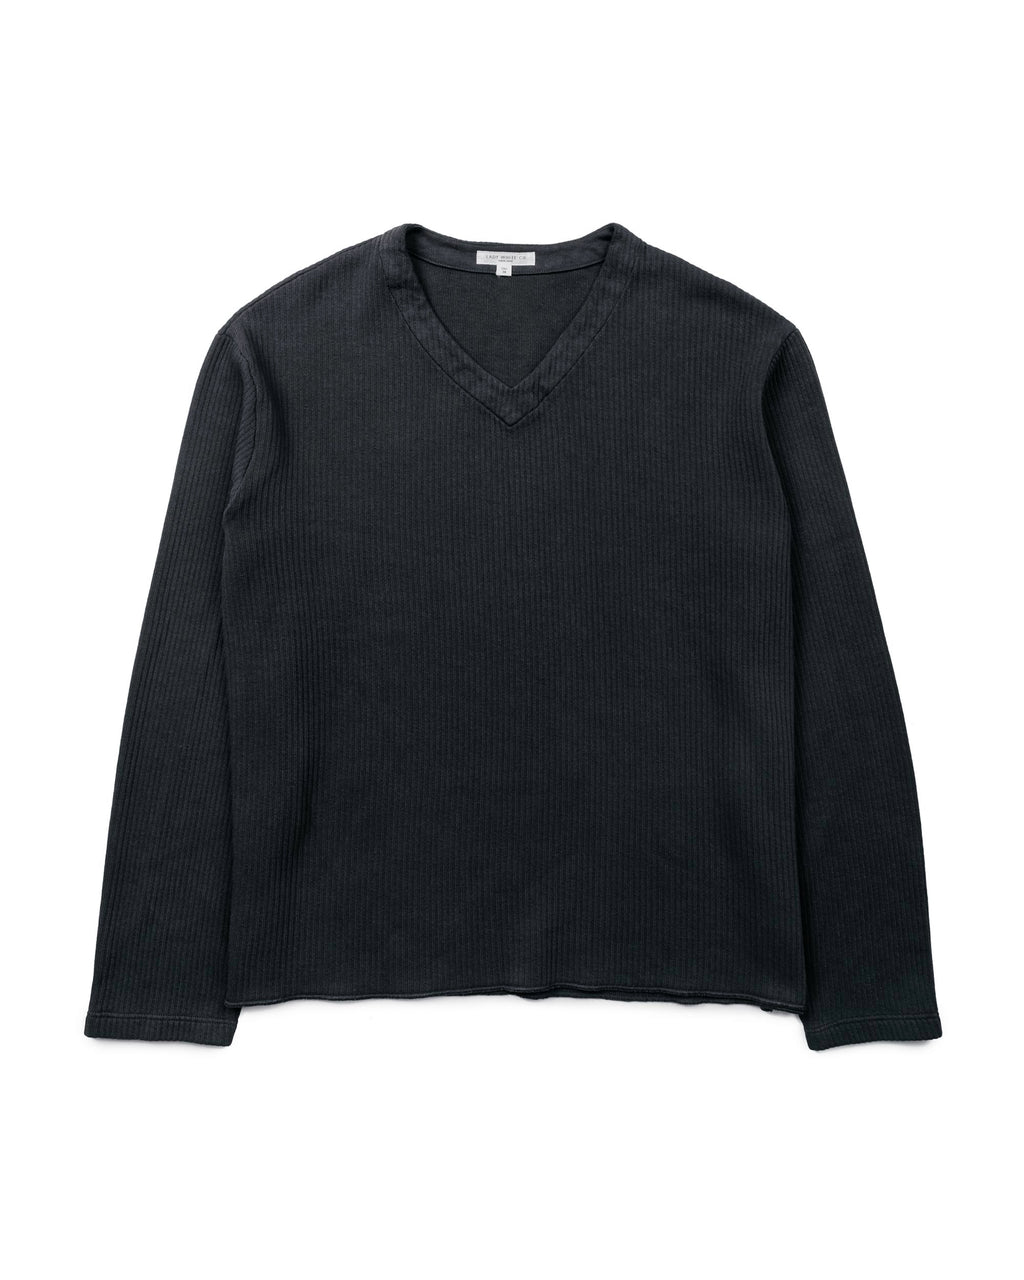 V- Neck Sweater 50/50 Wool / Acrylic Black / Navy - Armstrong Aviation  Clothing